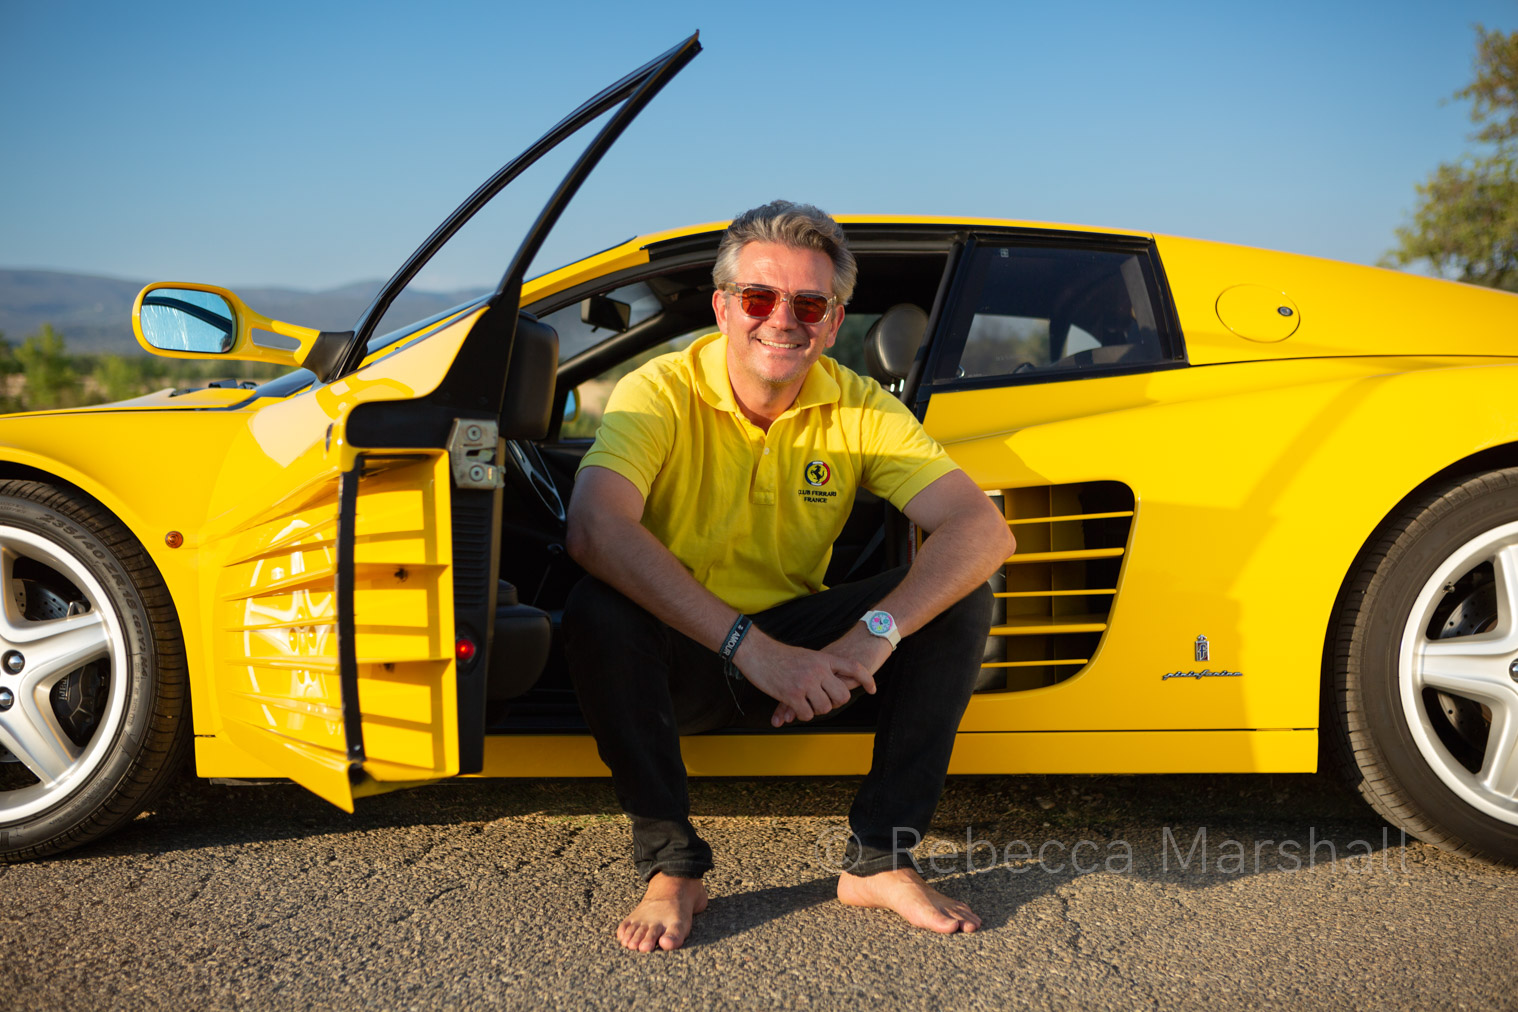 Man in white shirt poses for the photographer sitting in his yellow Ferrari